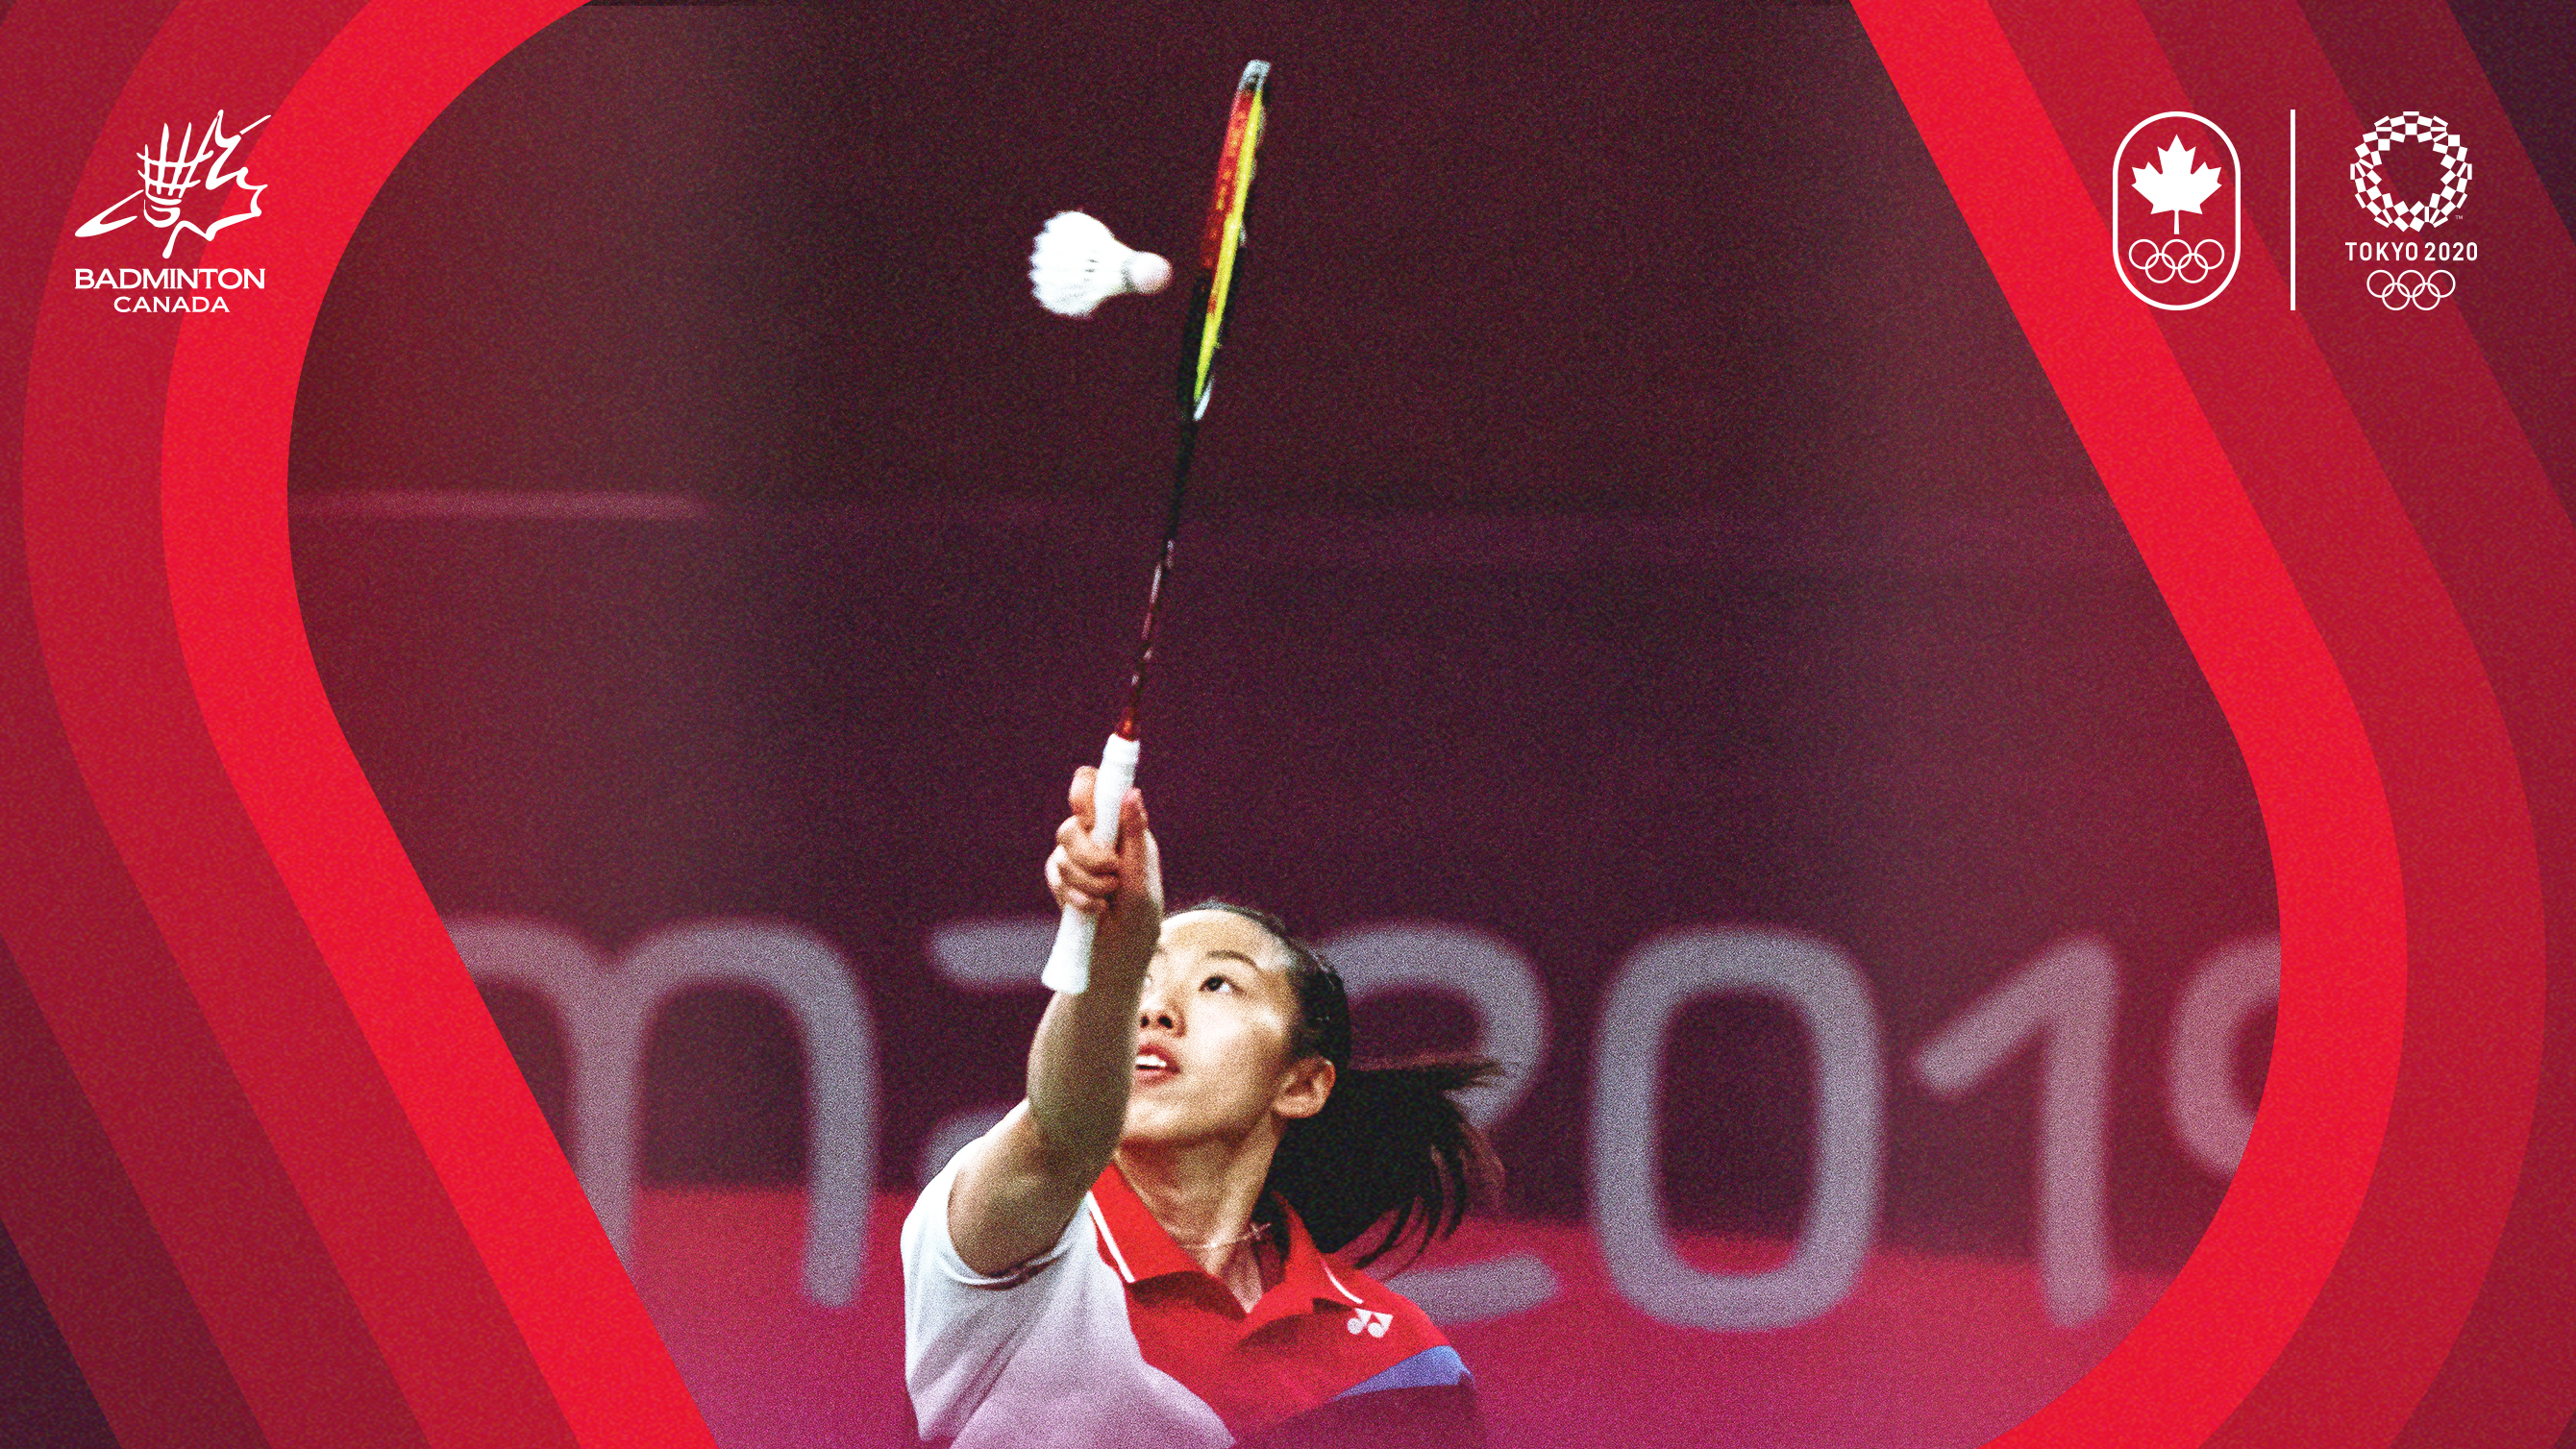 Team Canada to have its largest Olympic badminton team ever at Tokyo 2020 -  Team Canada - Official Olympic Team Website